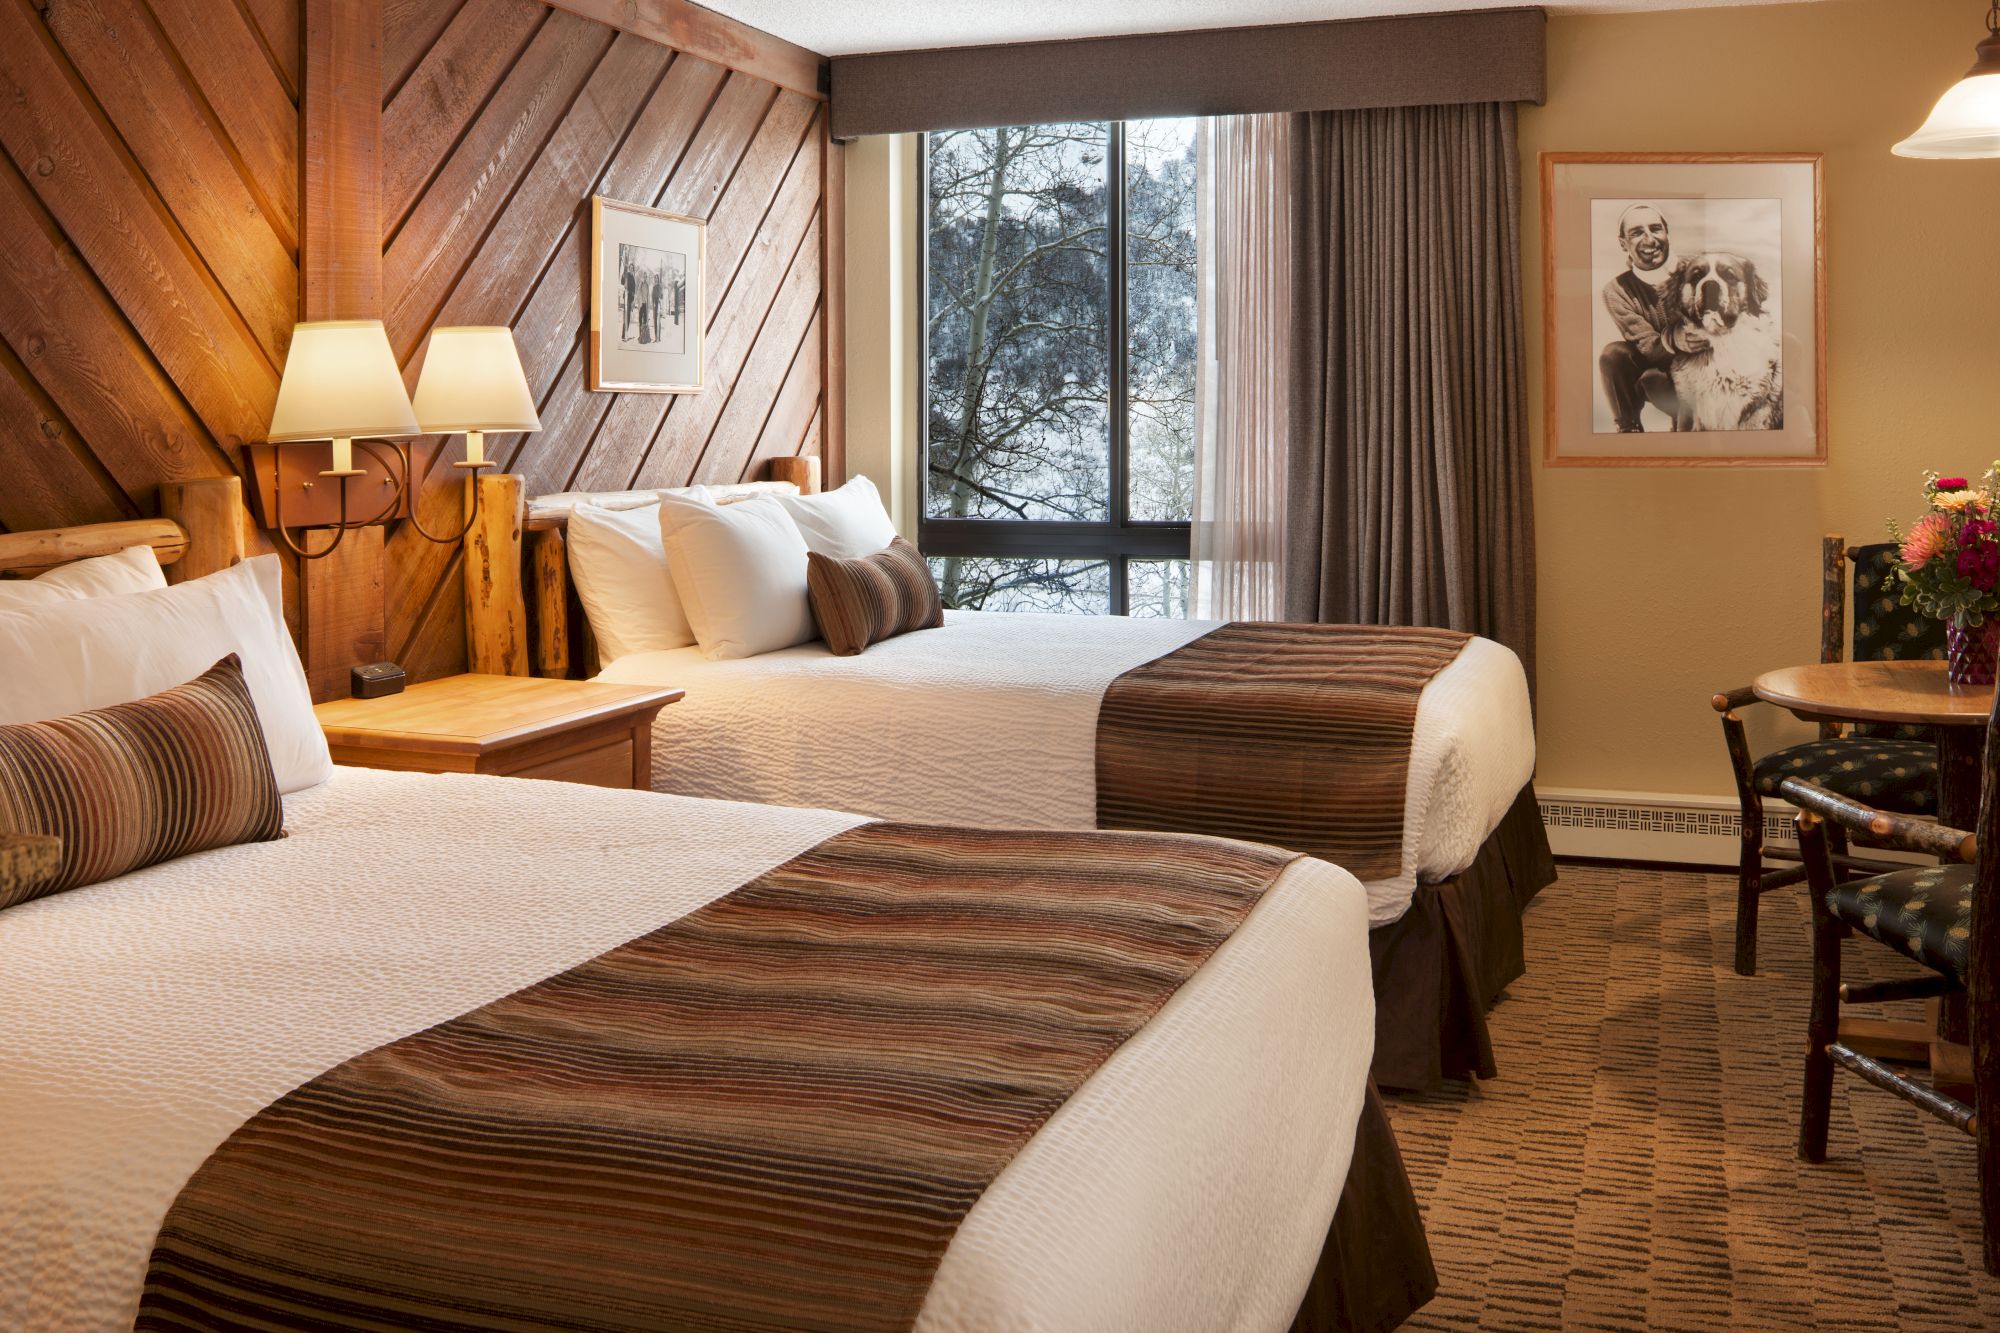 The image shows a cozy hotel room featuring two double beds with brown accents, a wood-paneled wall, a window with a view, and a small seating area.